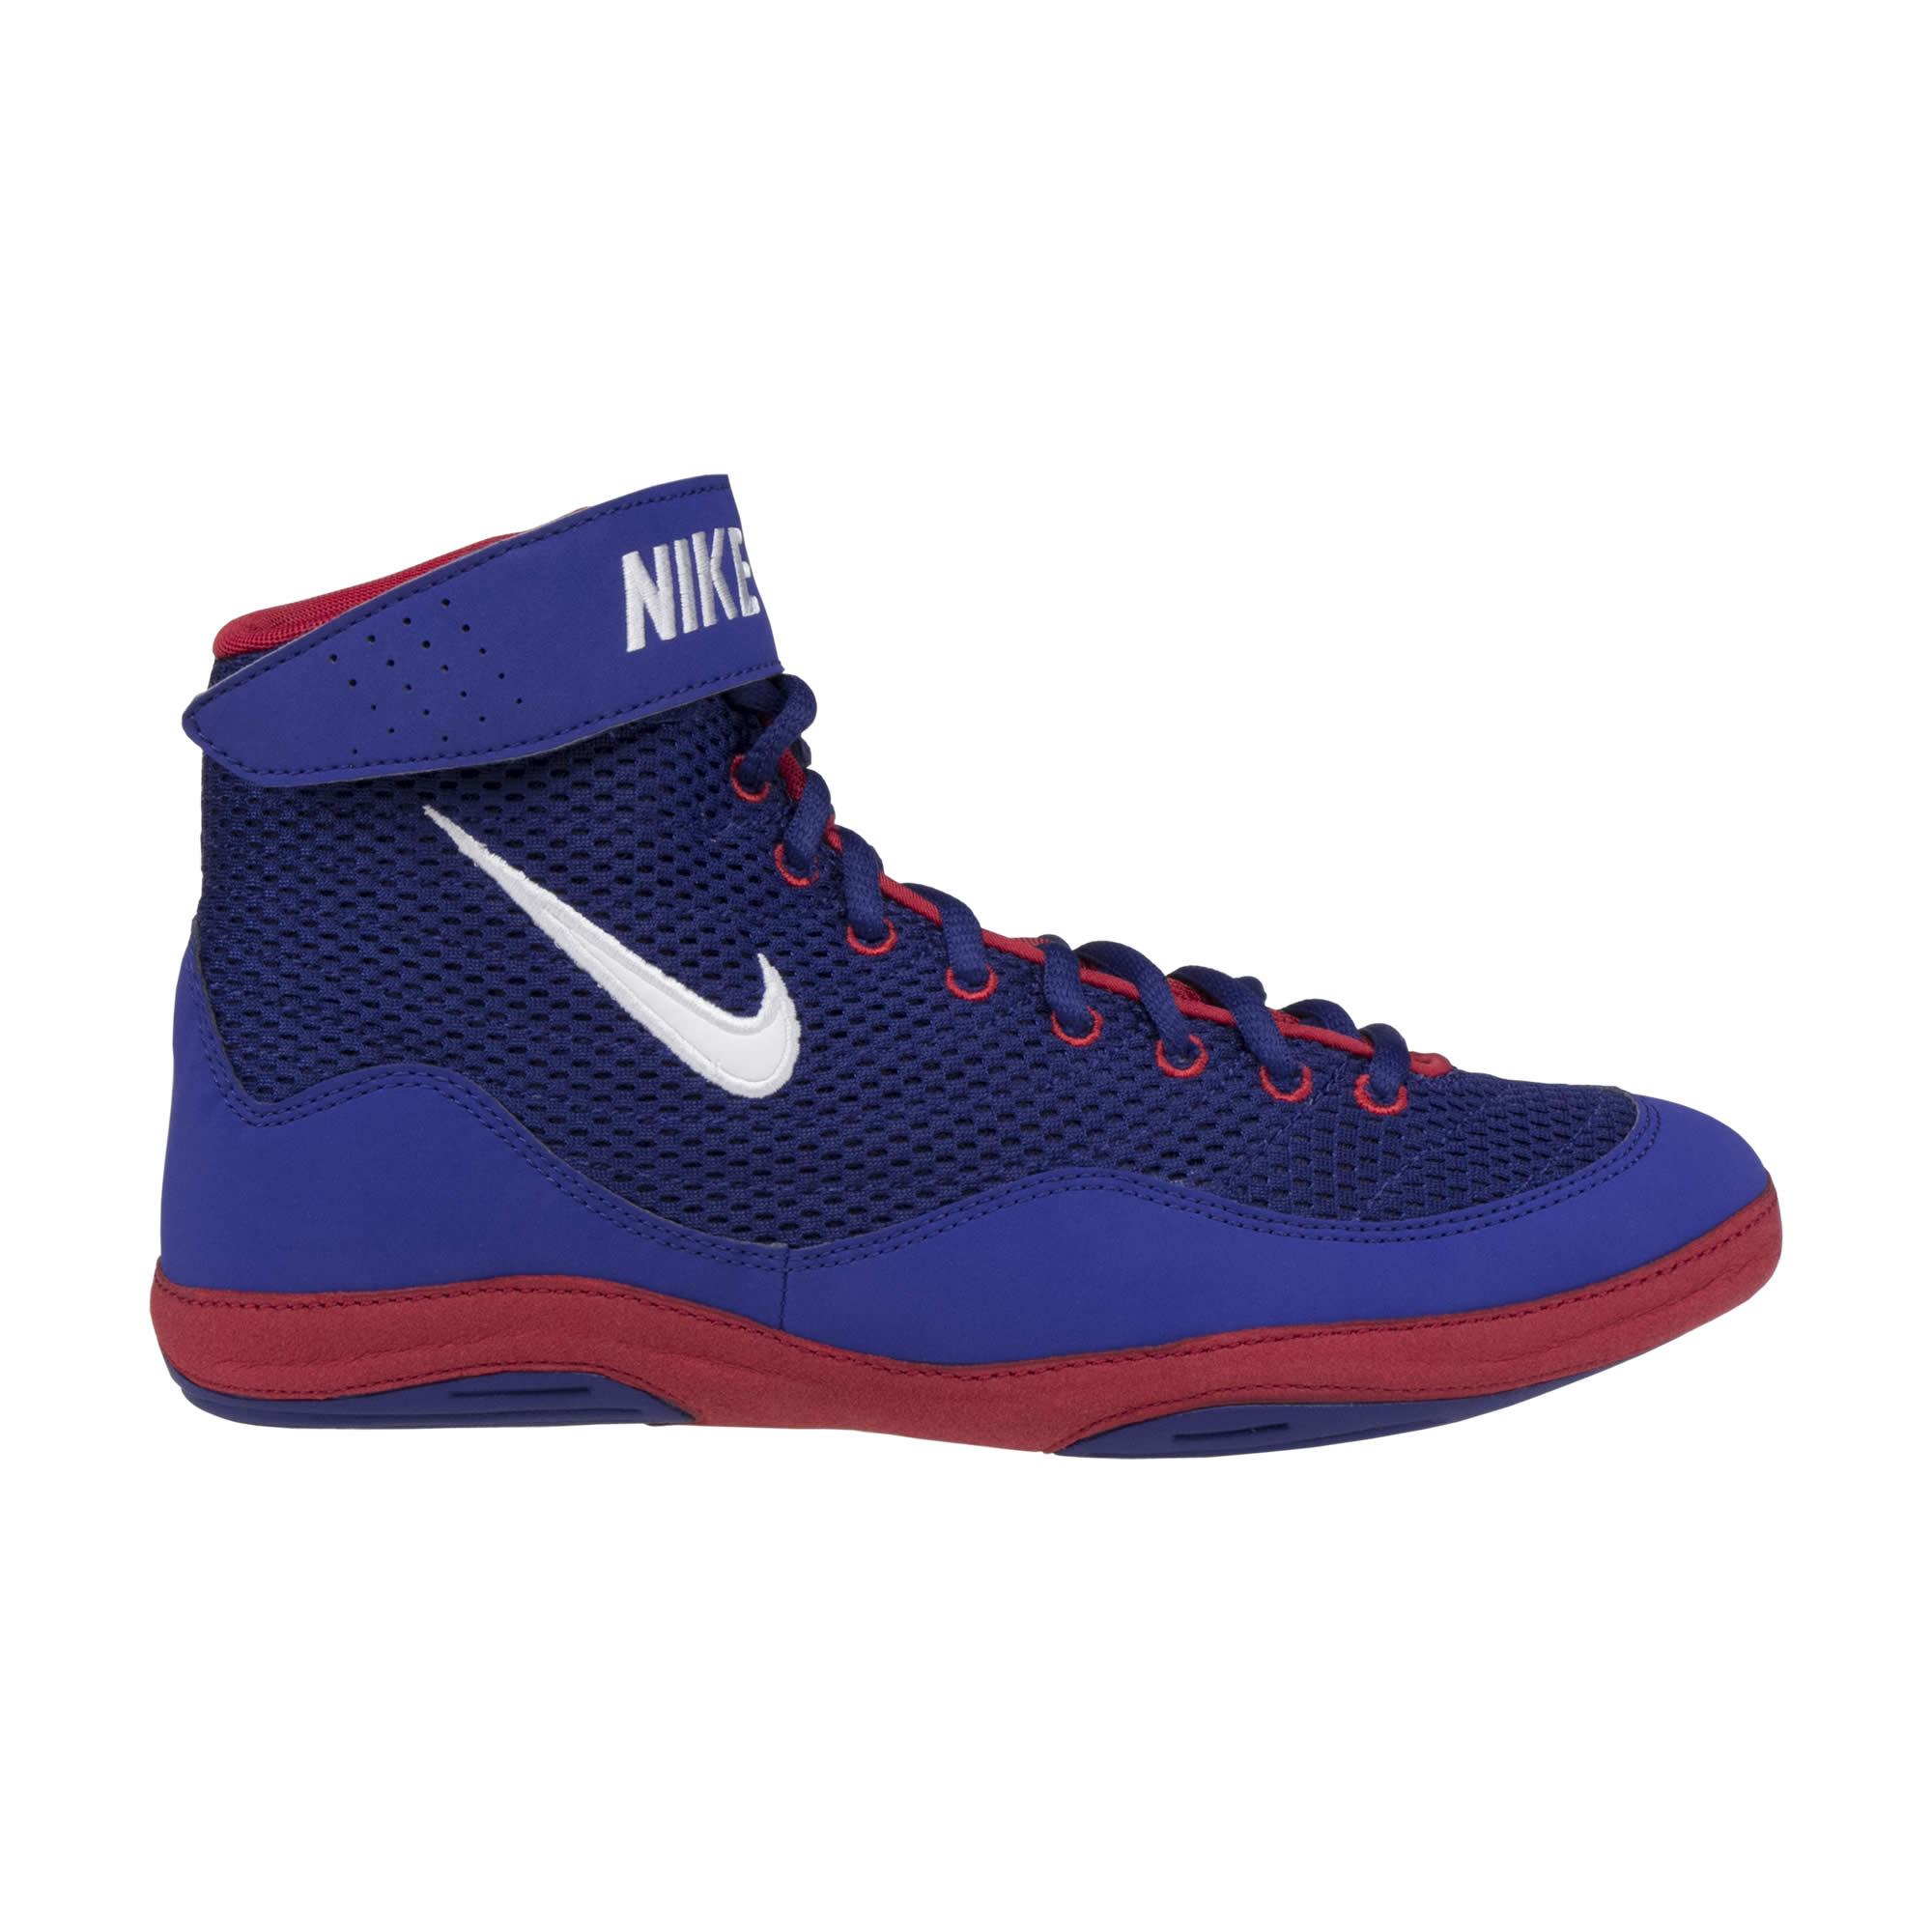 Red and Blue Nike Logo - Nike Inflict 3 Shoes